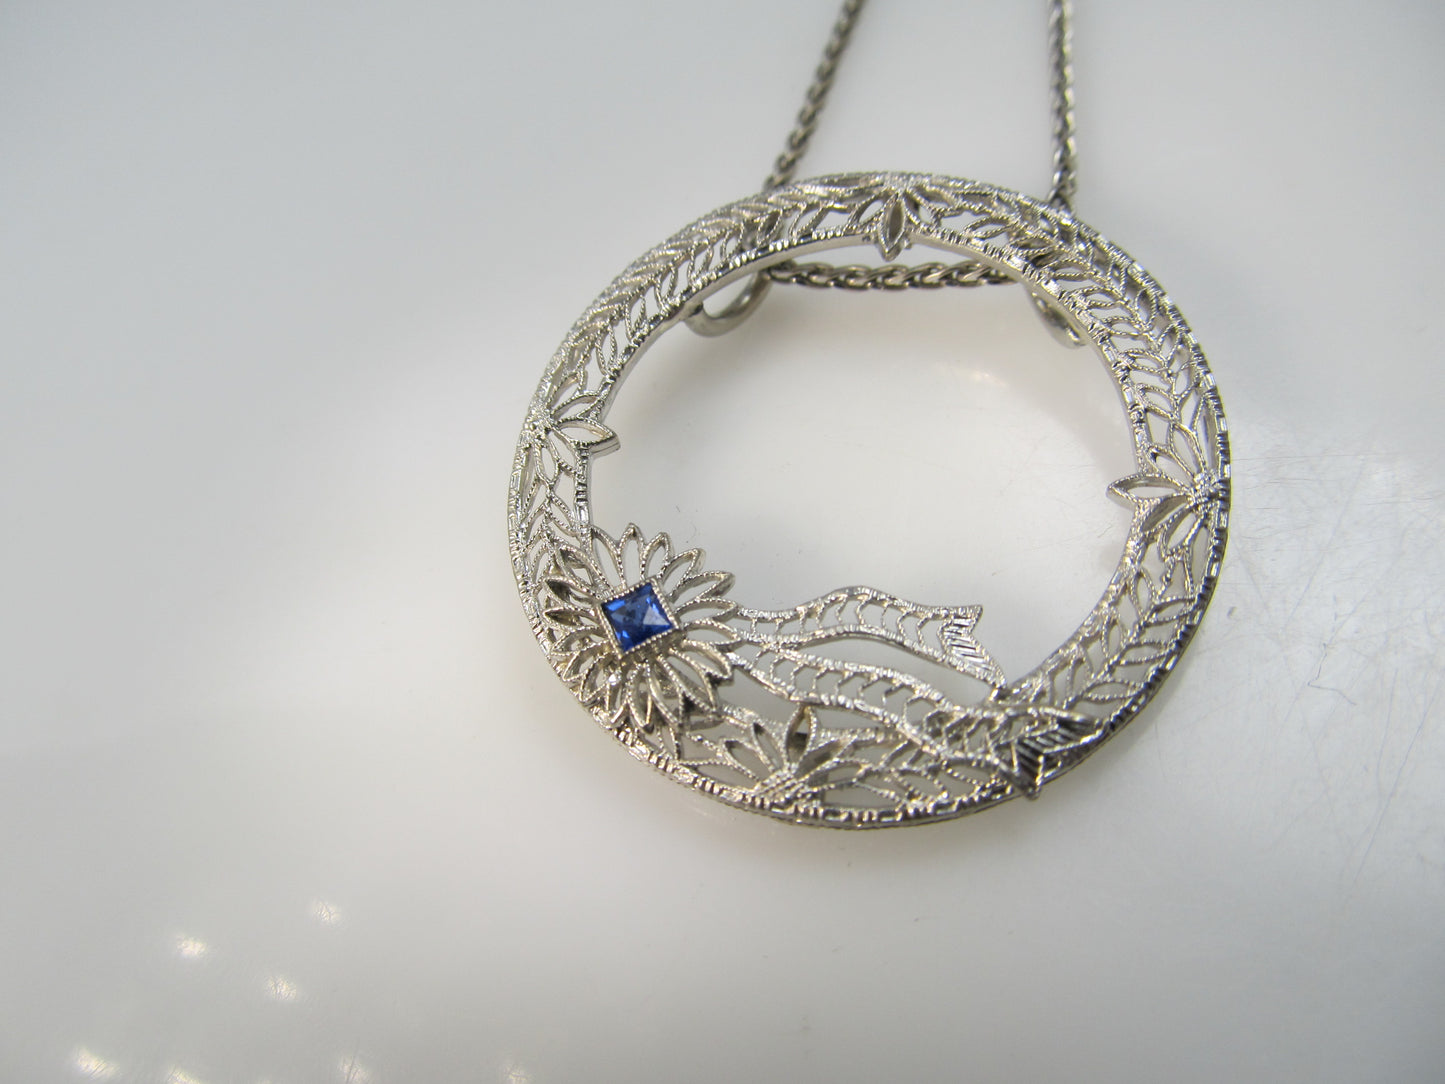 14k white gold filigree circle necklace with a sapphire, circa 1920